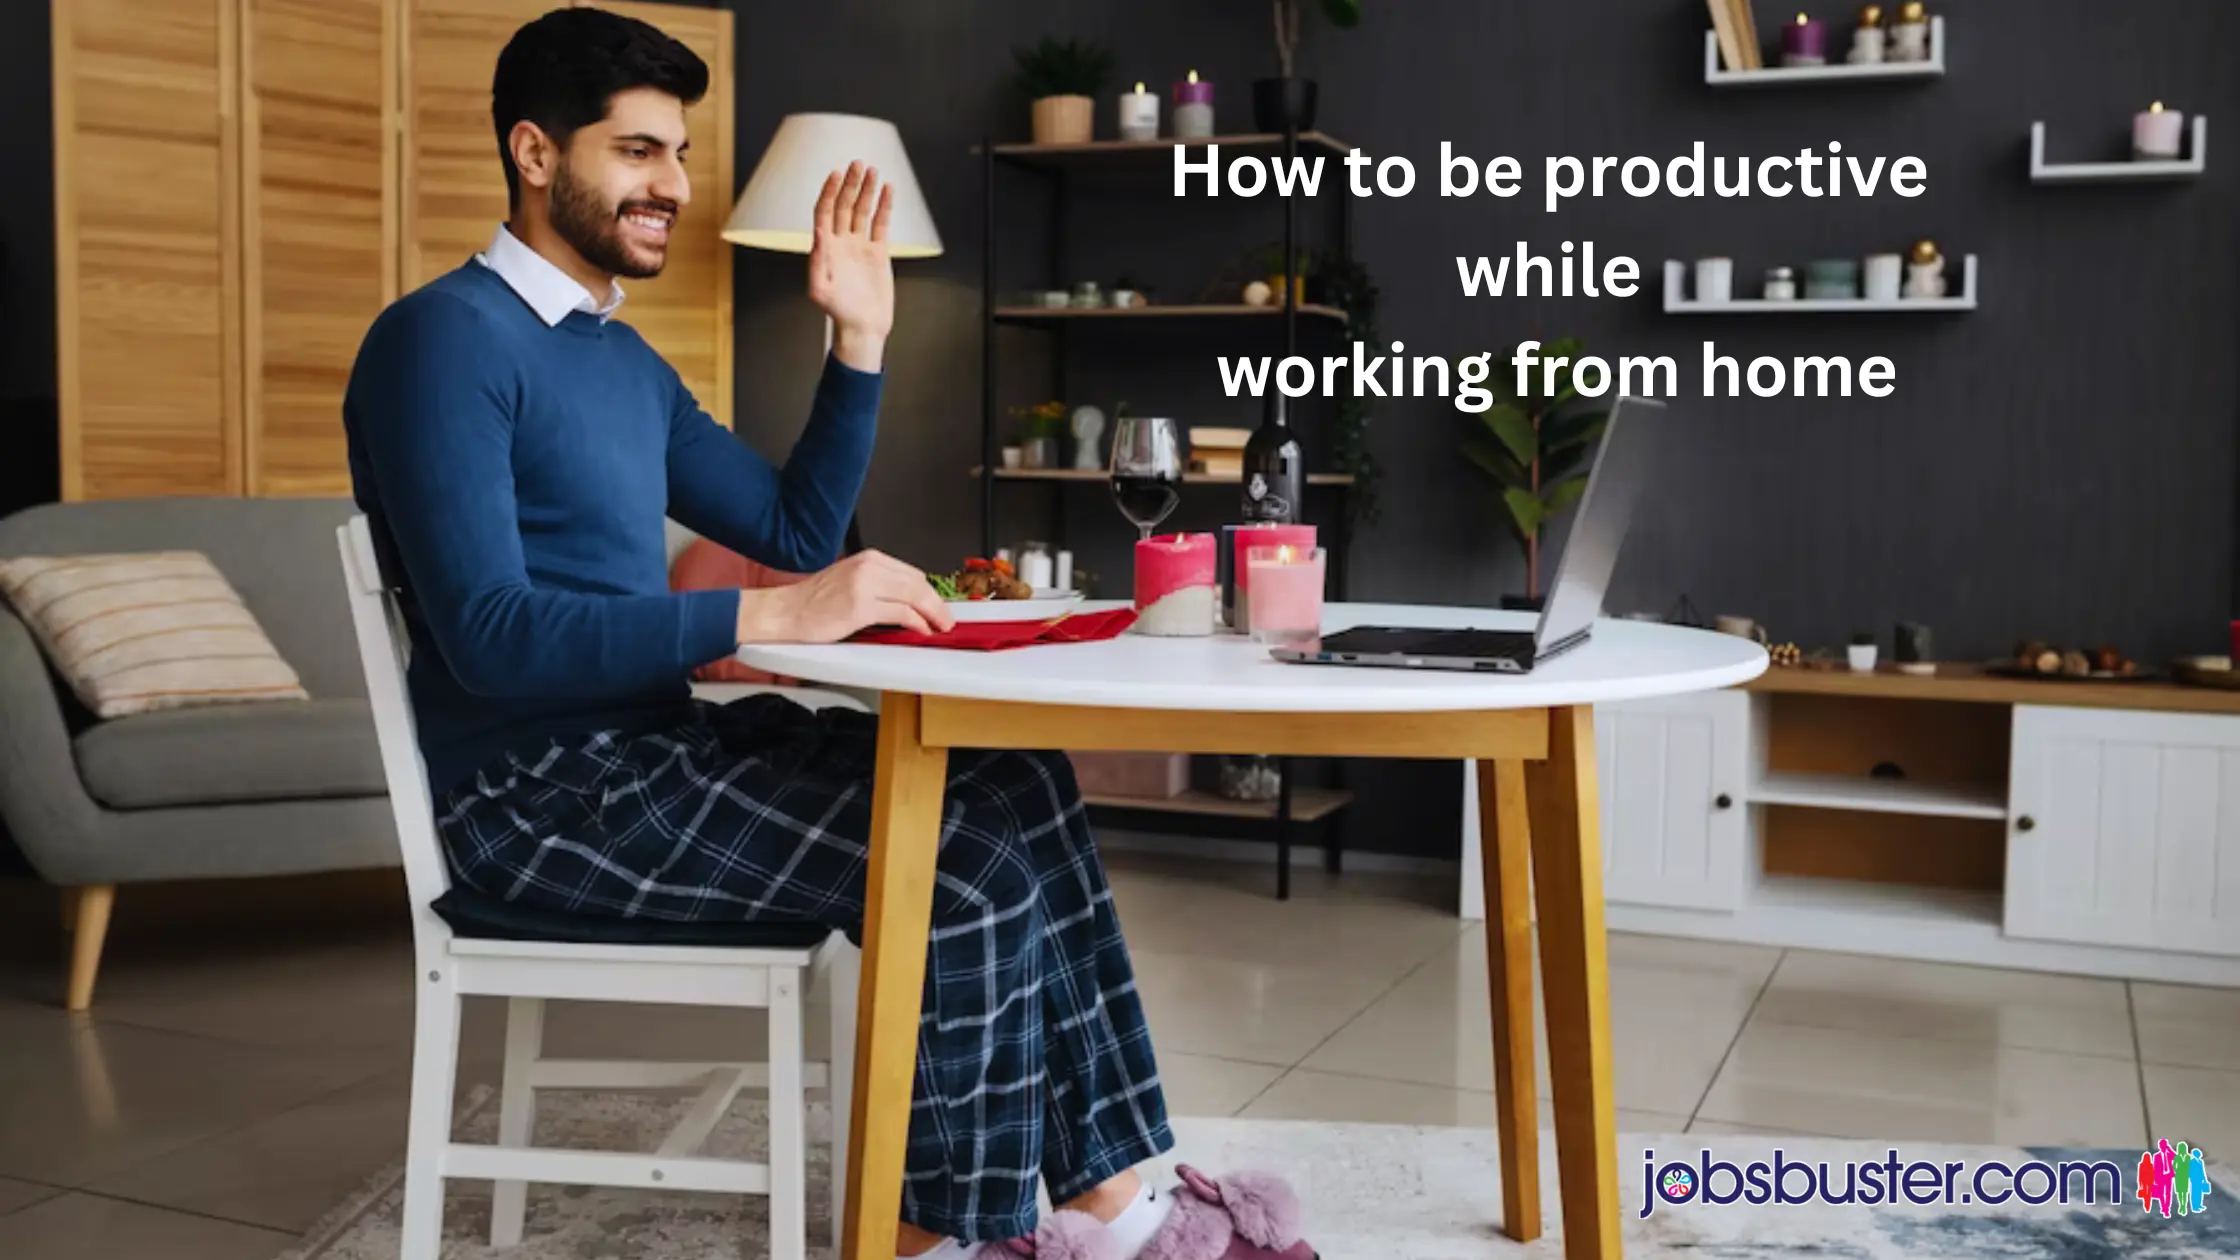 How to be productive while working from home